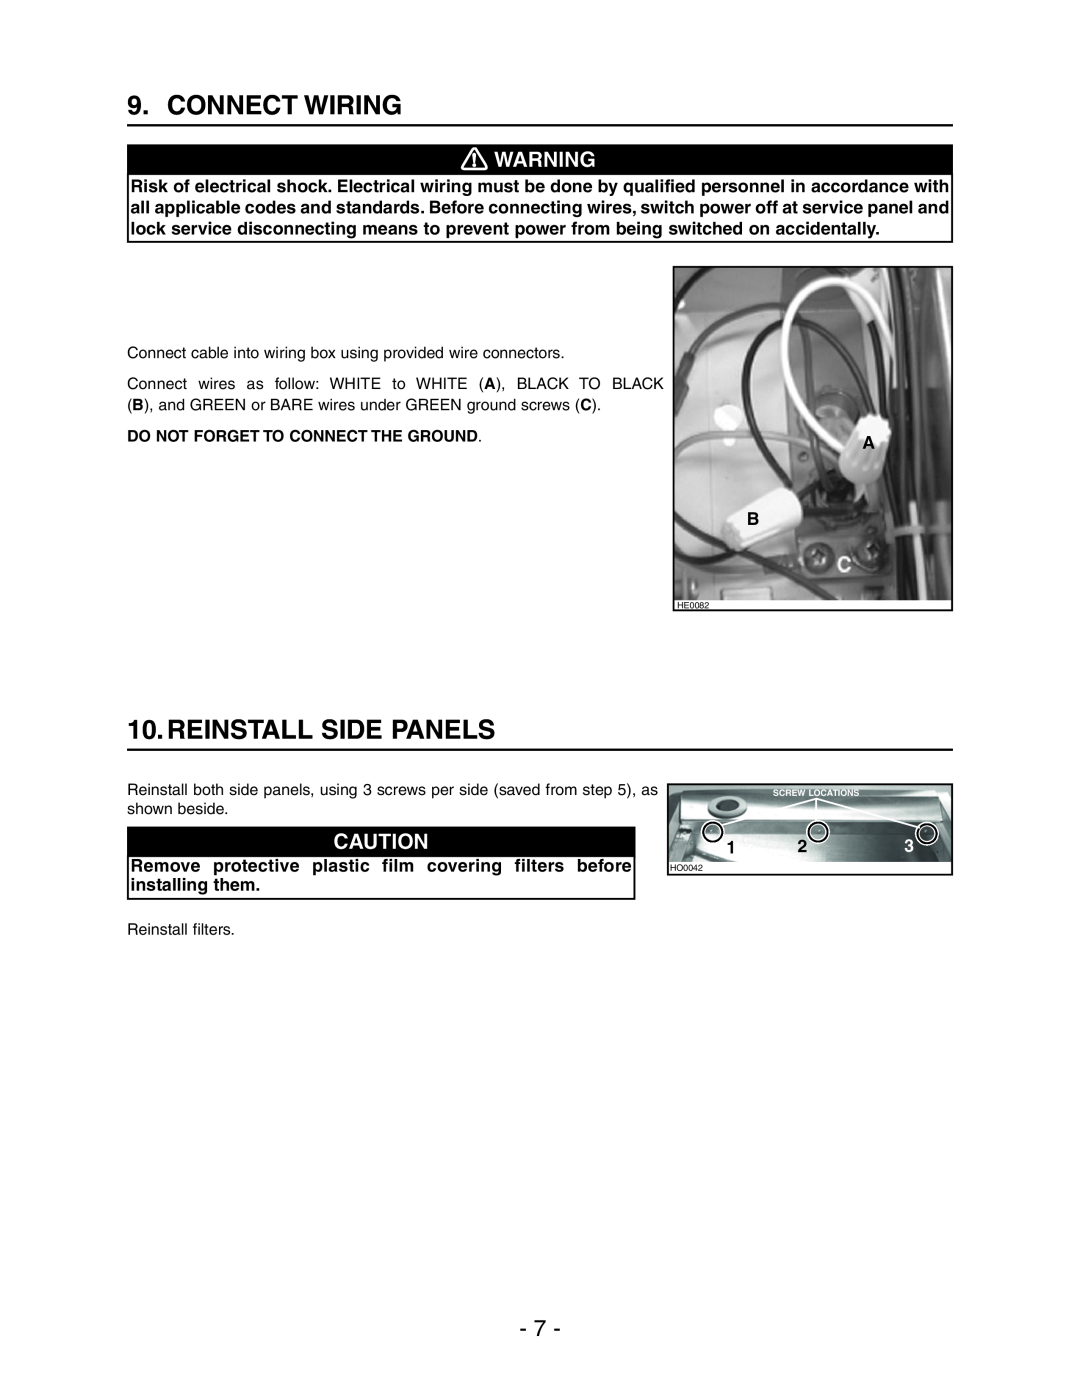 Broan Model E662 installation instructions Connect Wiring, Reinstall Side Panels 